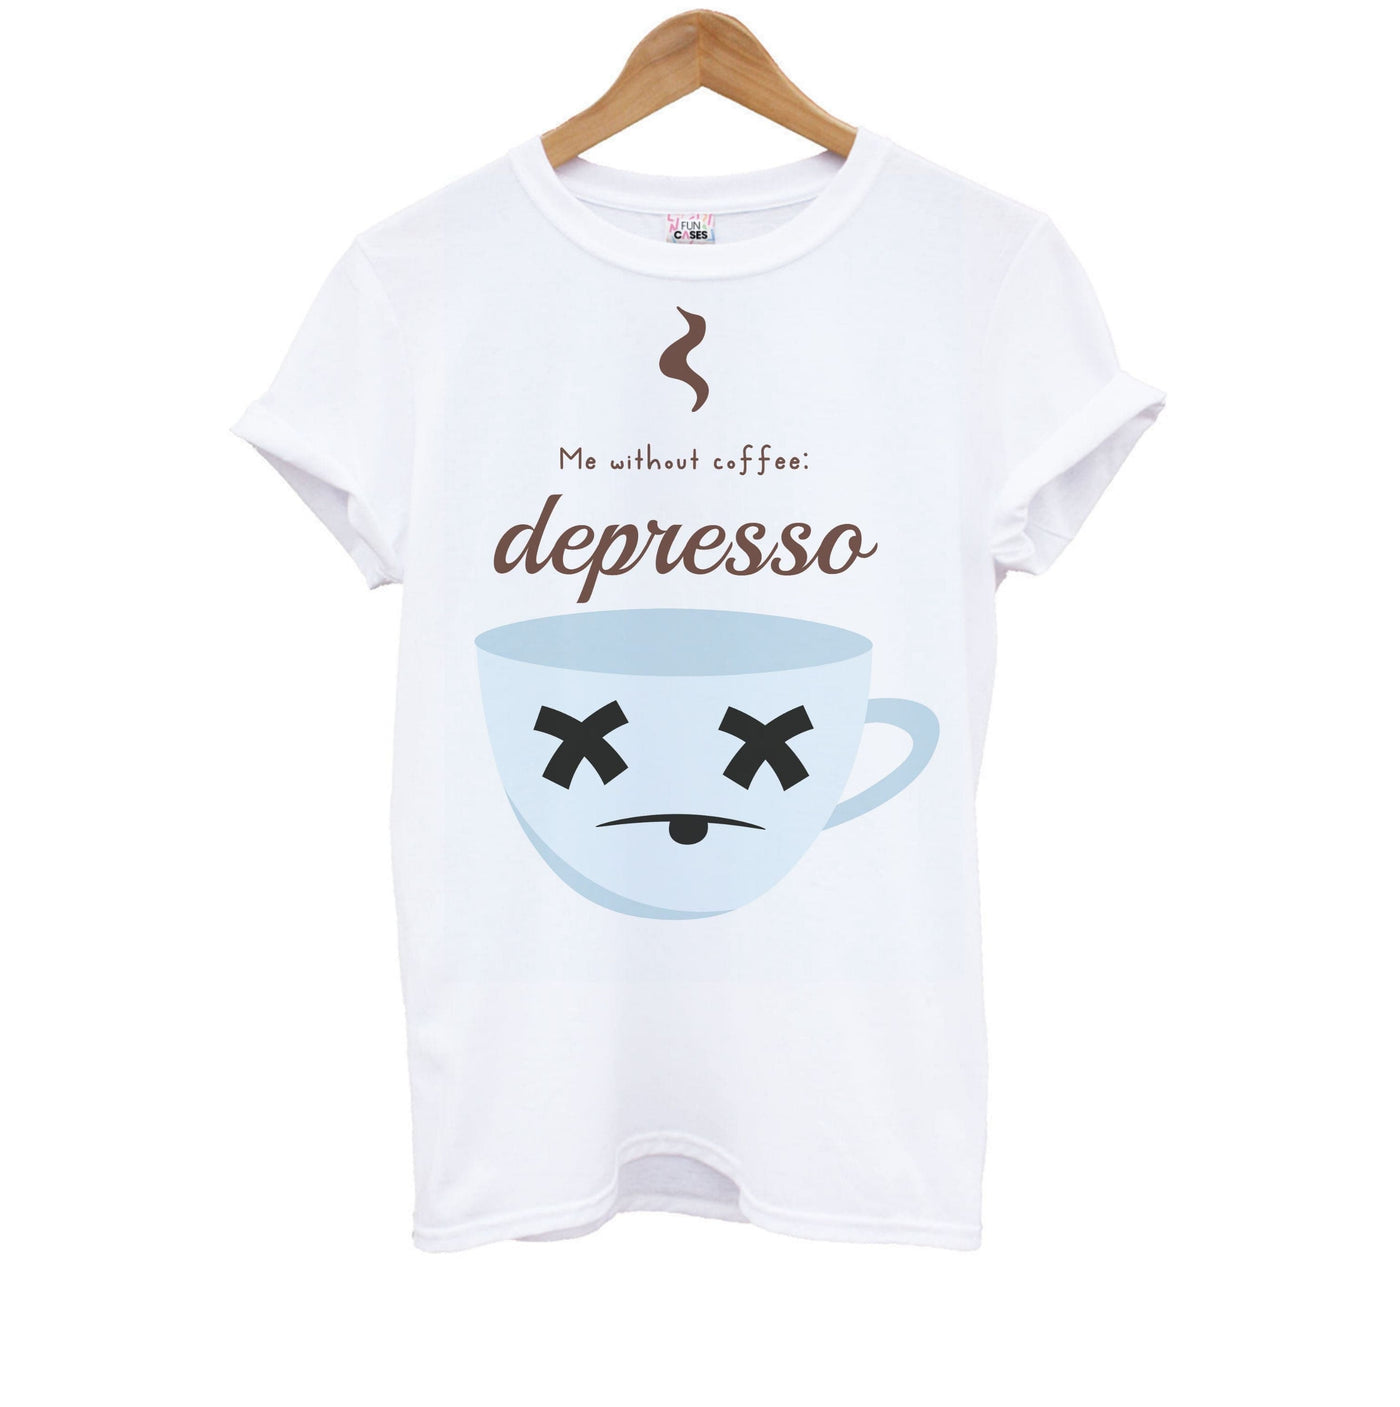 Depresso - Funny Quotes Kids T-Shirt